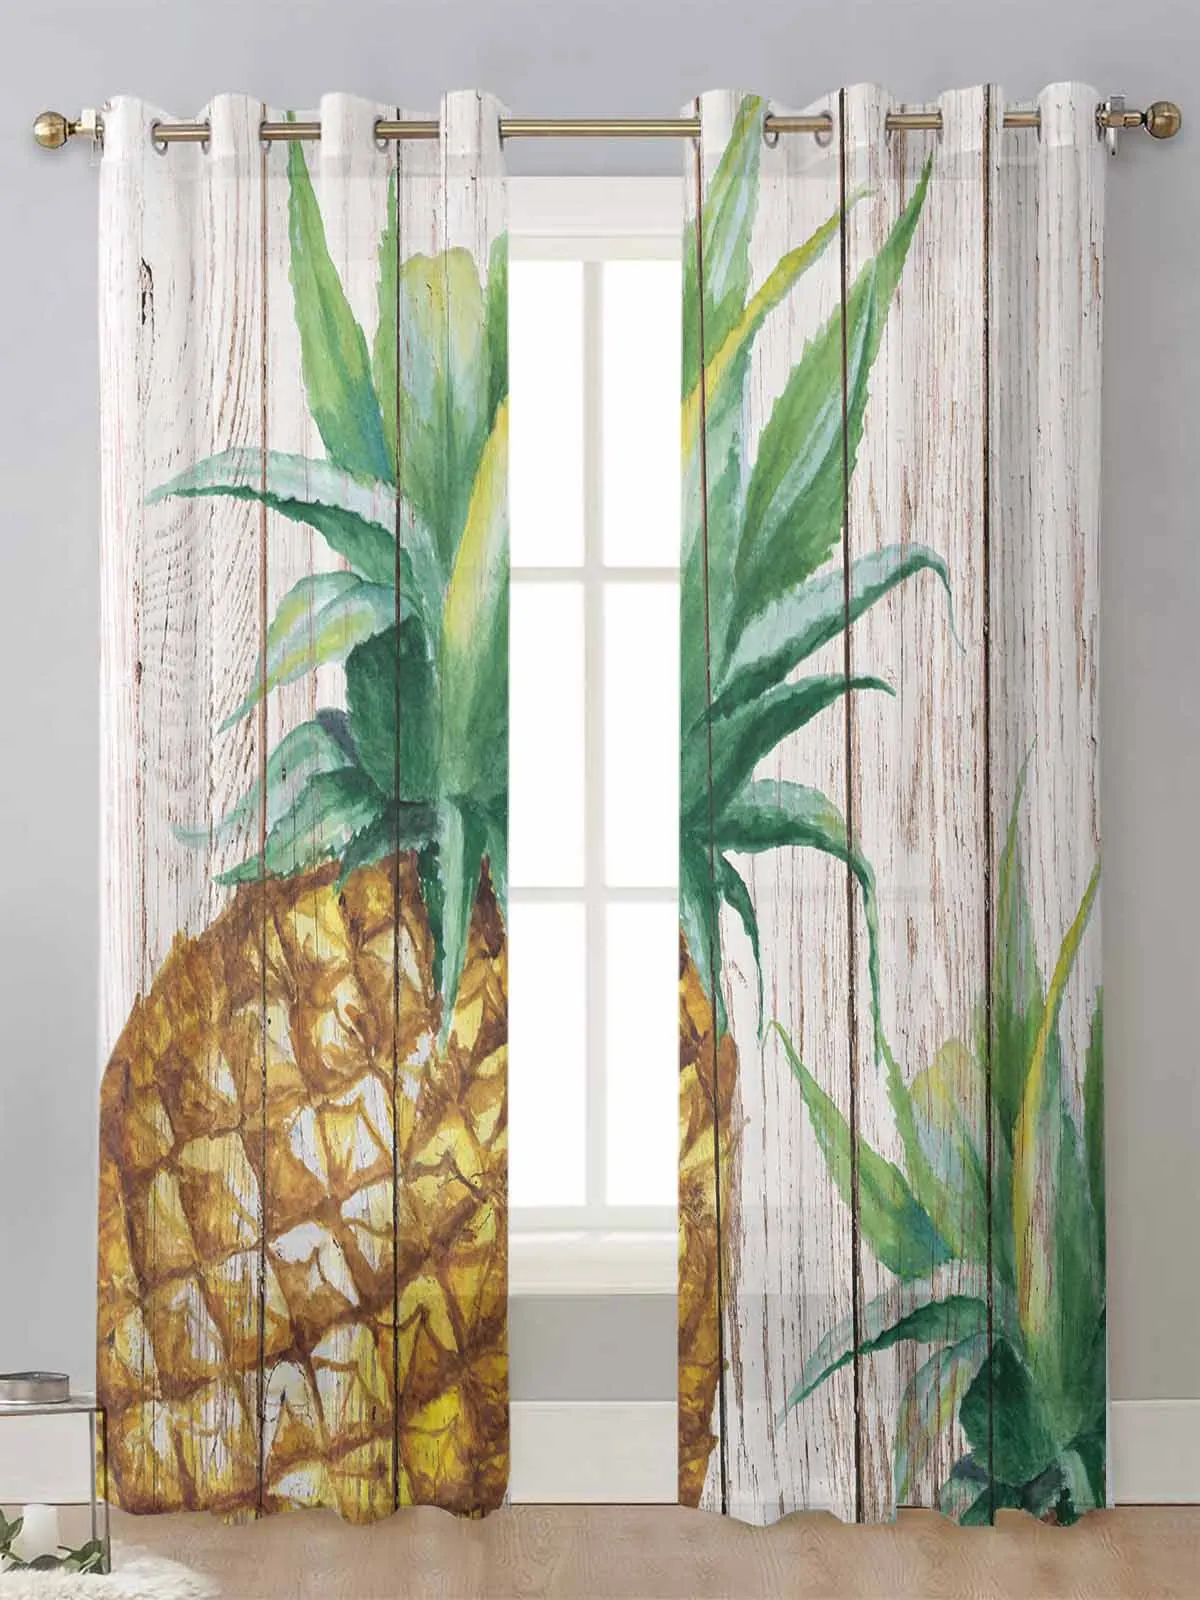 

Vintage Wood Grain Tropical Fruit Pineapple Sheer Curtains For Living Room Window Voile Tulle Curtain Cortinas Drapes Home Decor